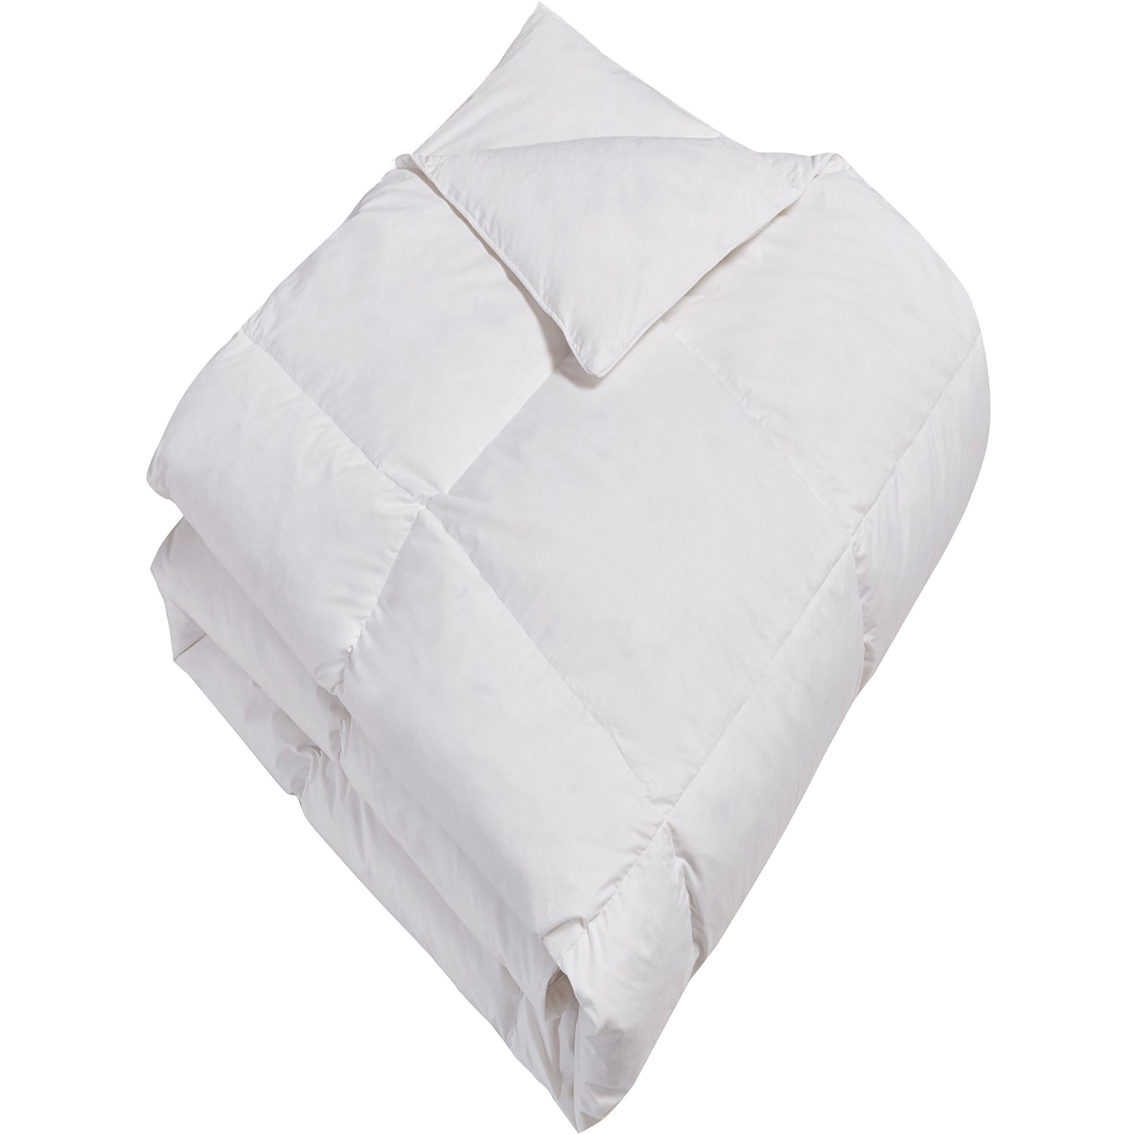 Kathy Ireland Home Essentials White Goose Feather And Down Comforter ...